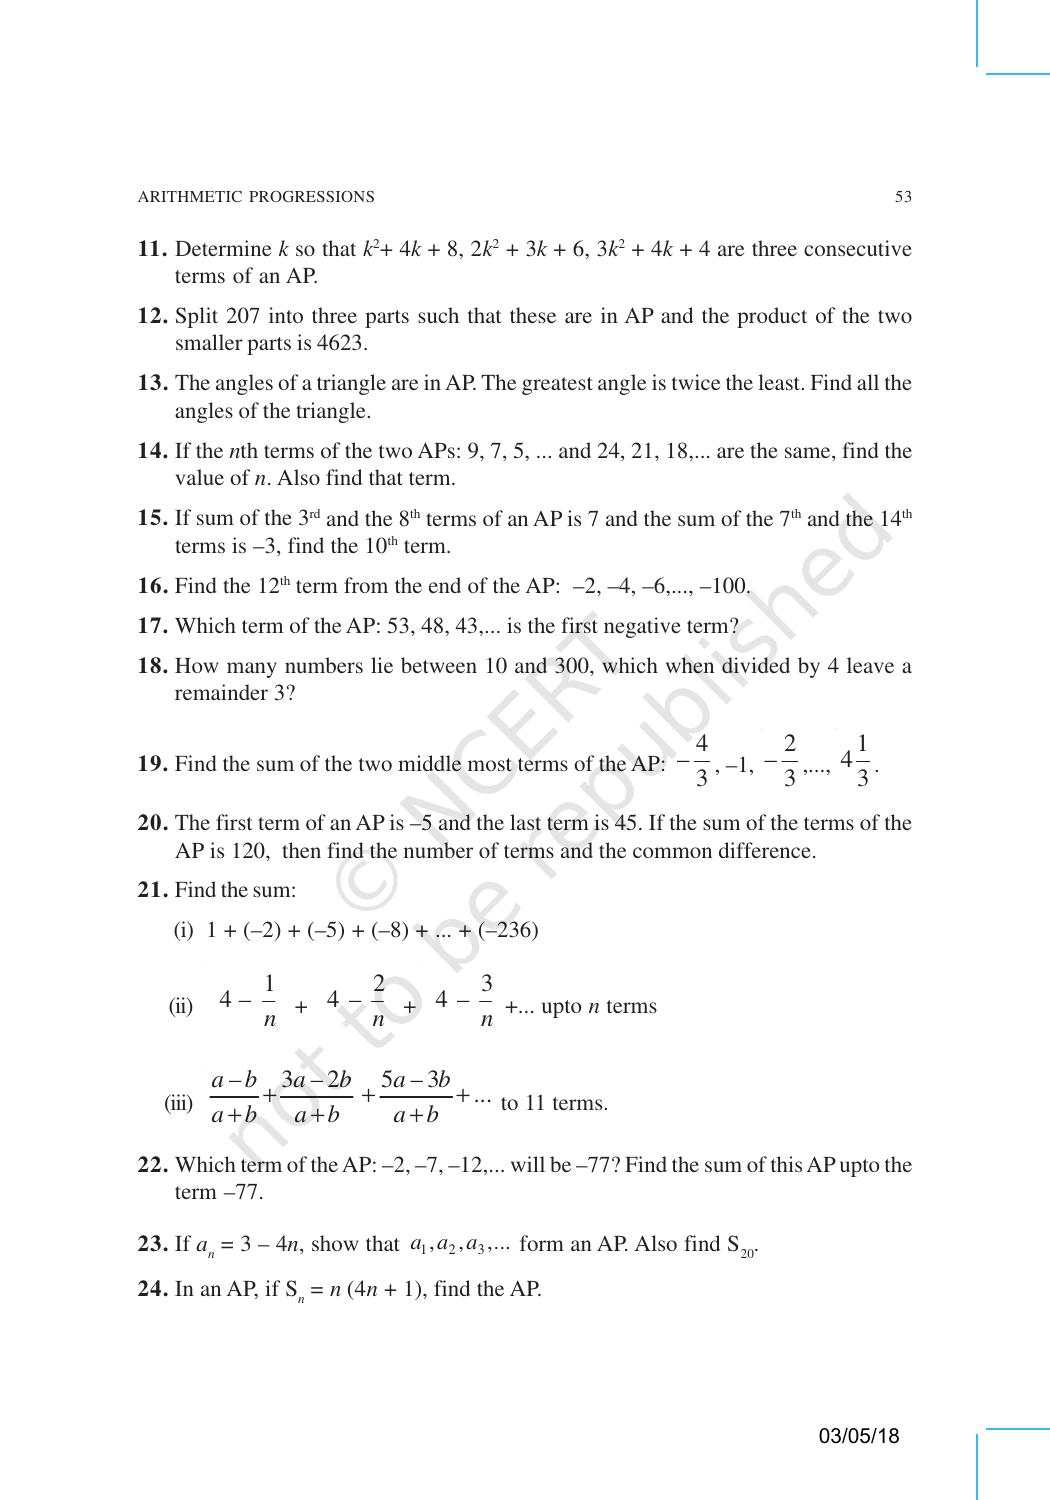 NCERT Exemplar Book for Class 10 Maths: Chapter 5 Arithmetic Progressions - Page 10